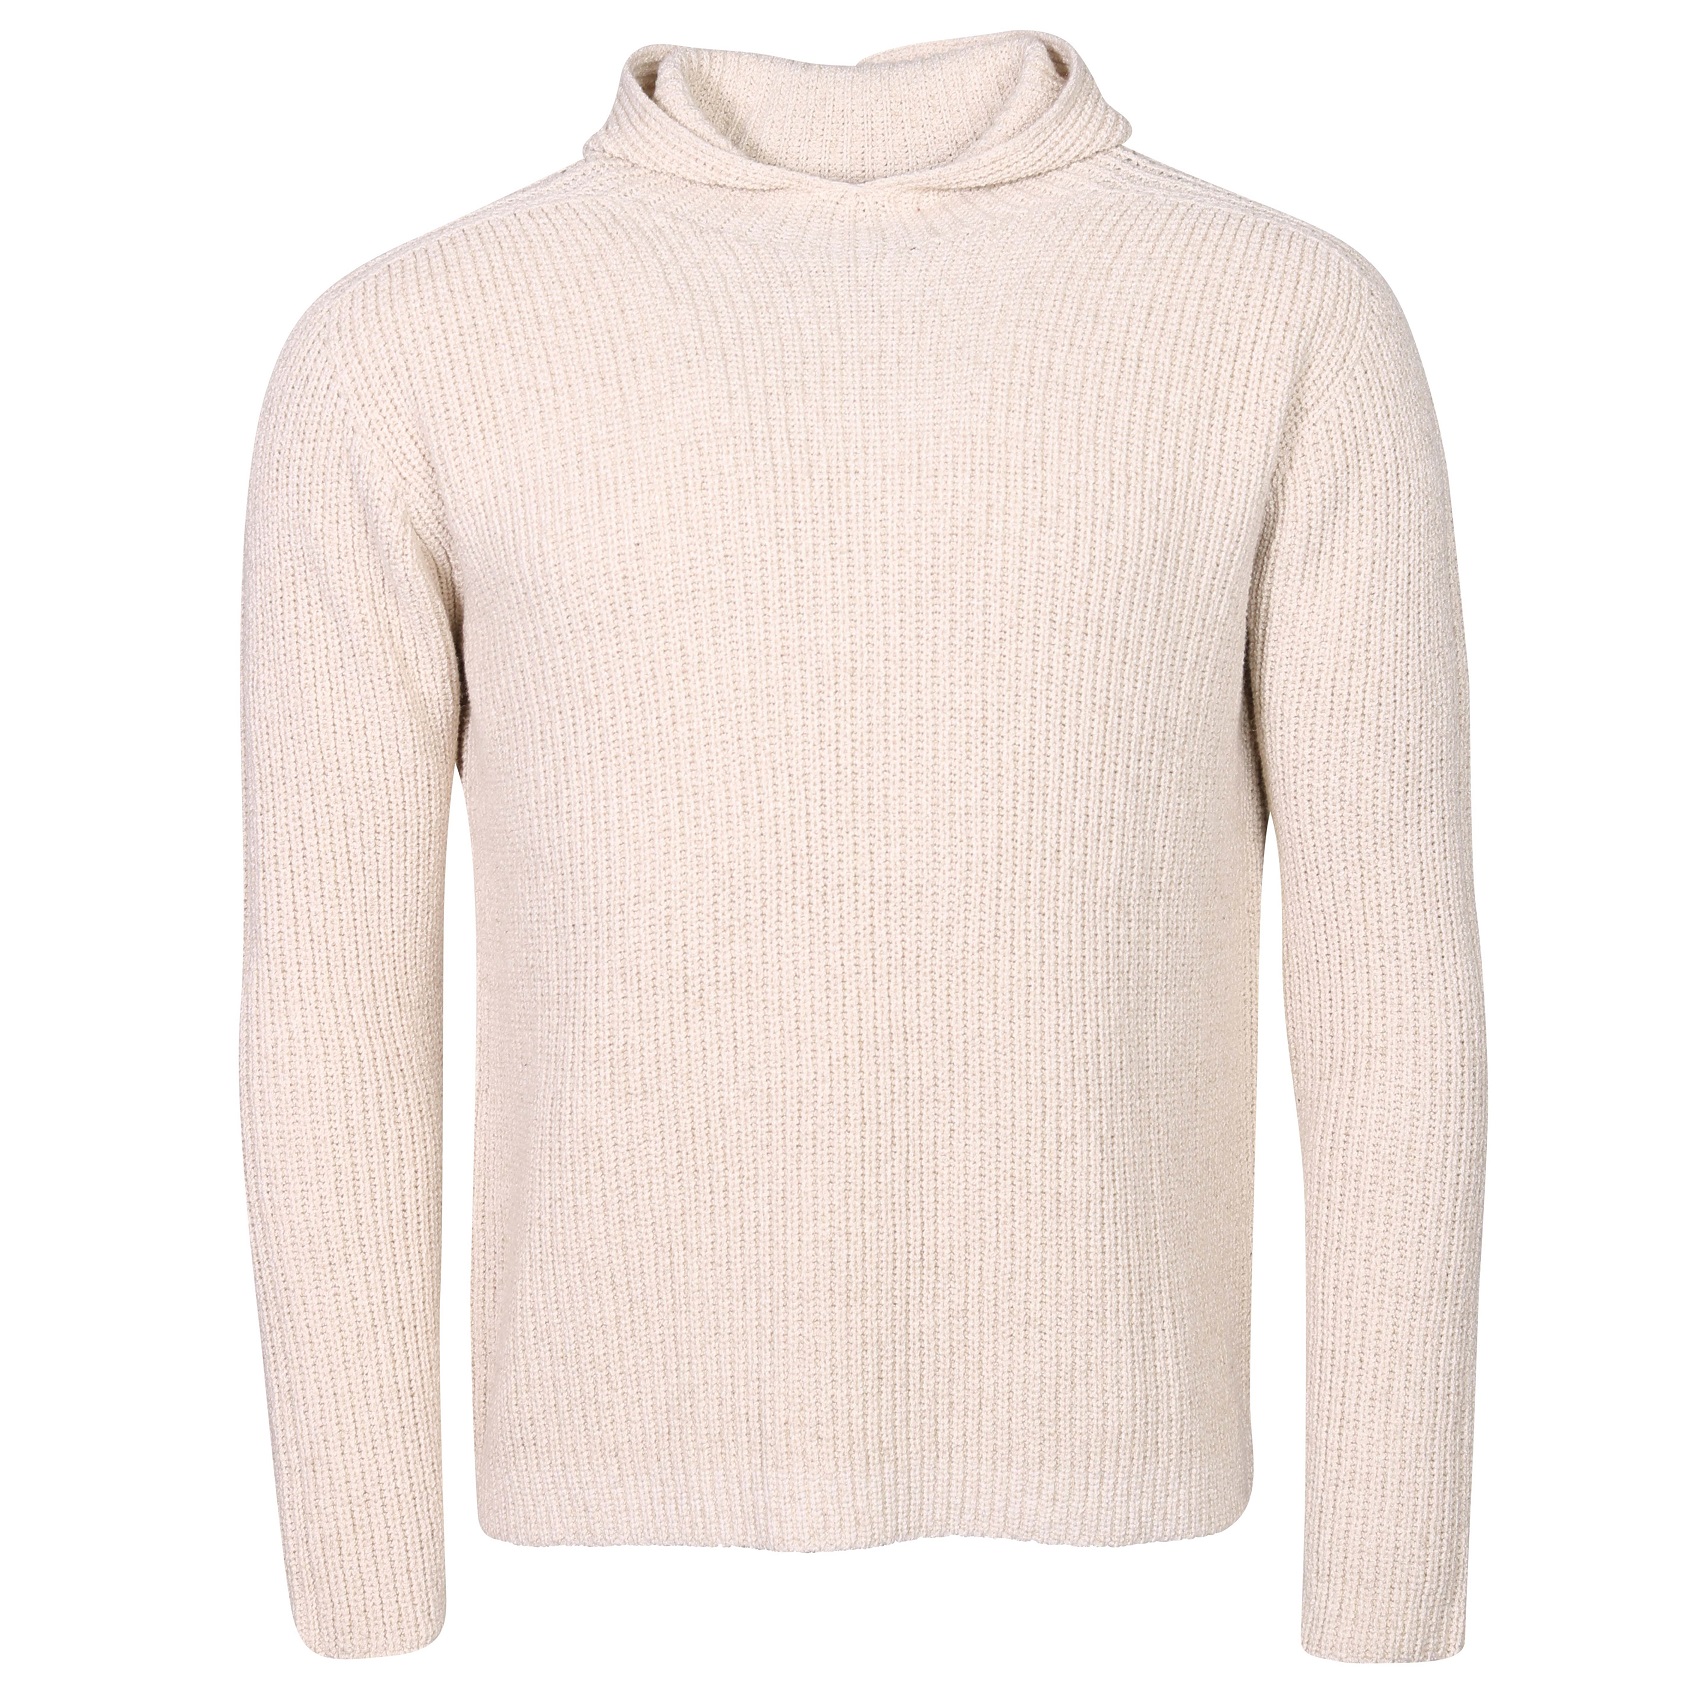 HANNES ROETHER Hooded Knit Pullover in Sugar